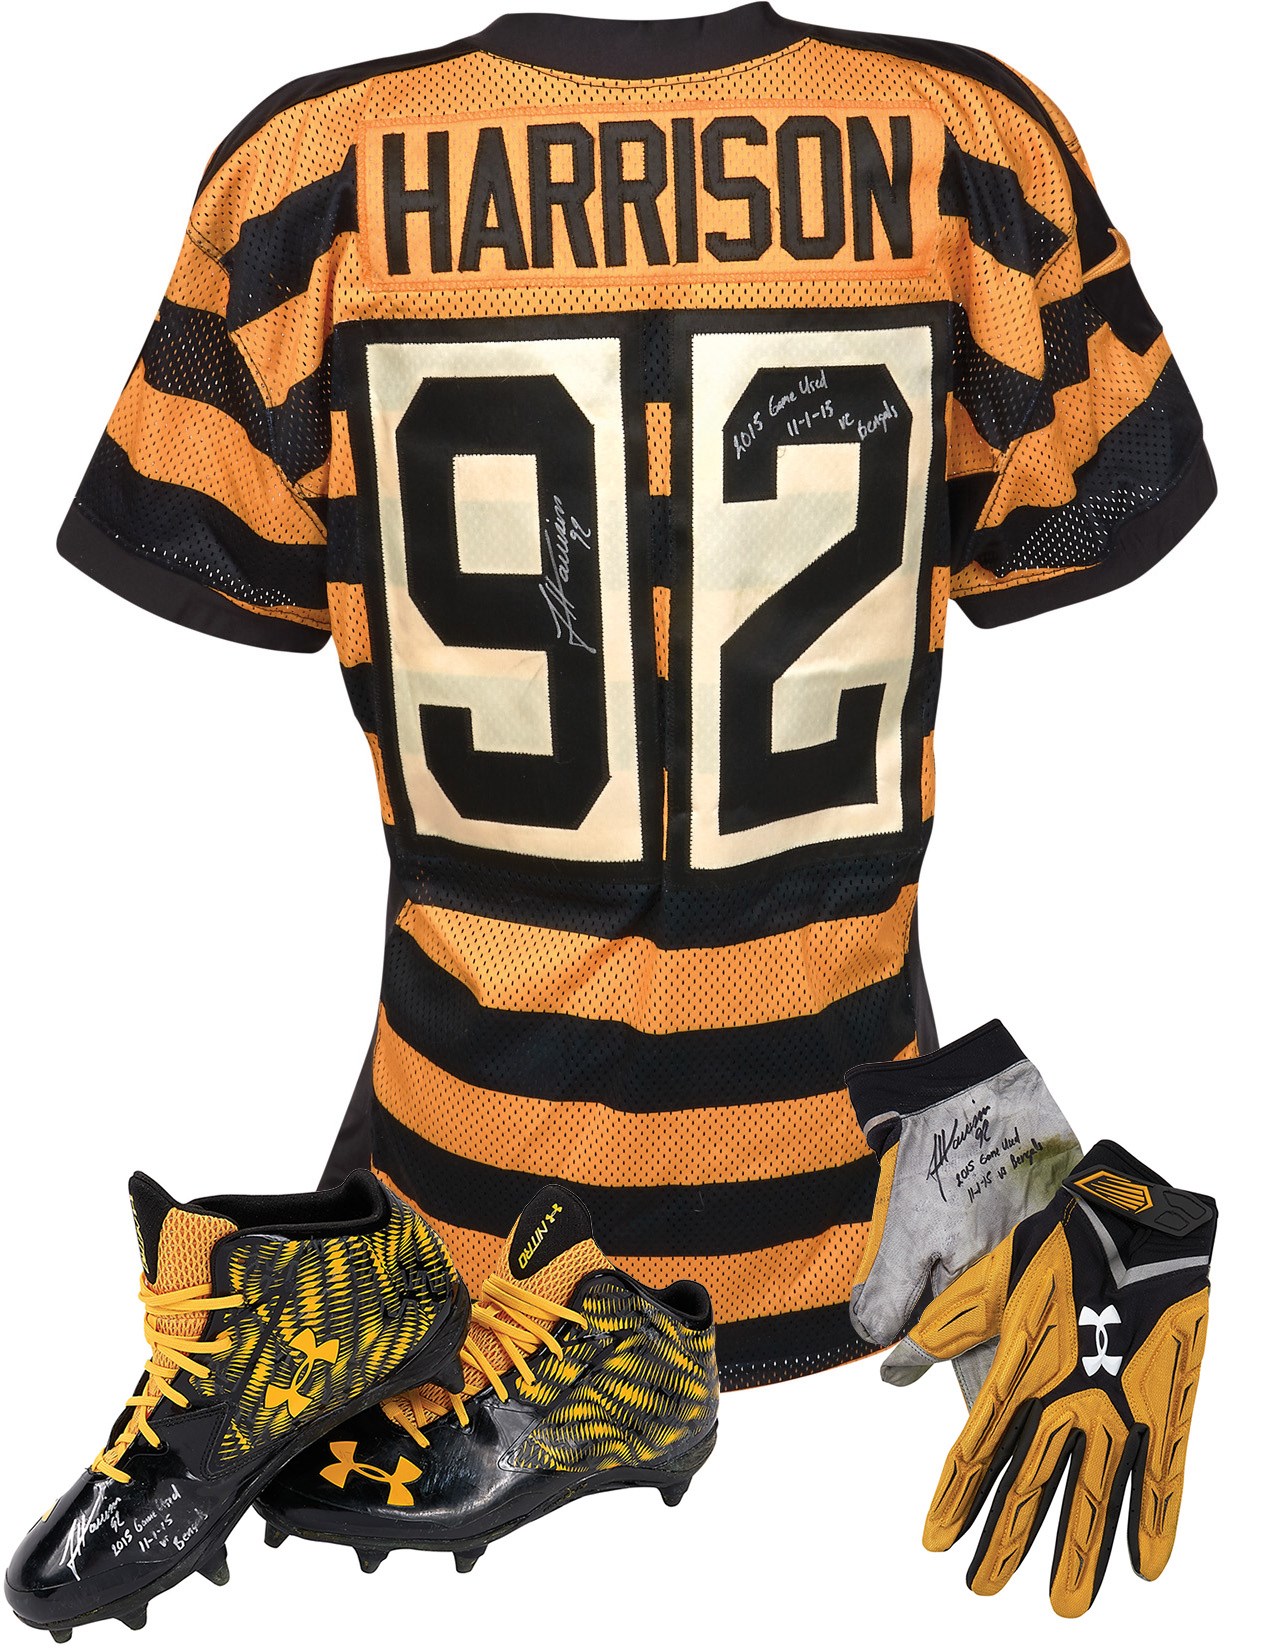 - 2015 James Harrison Pittsburgh Steelers Game Worn "Bumble Bee" Style Jersey with Cleats and Gloves from Harrison (Photo-Matched)